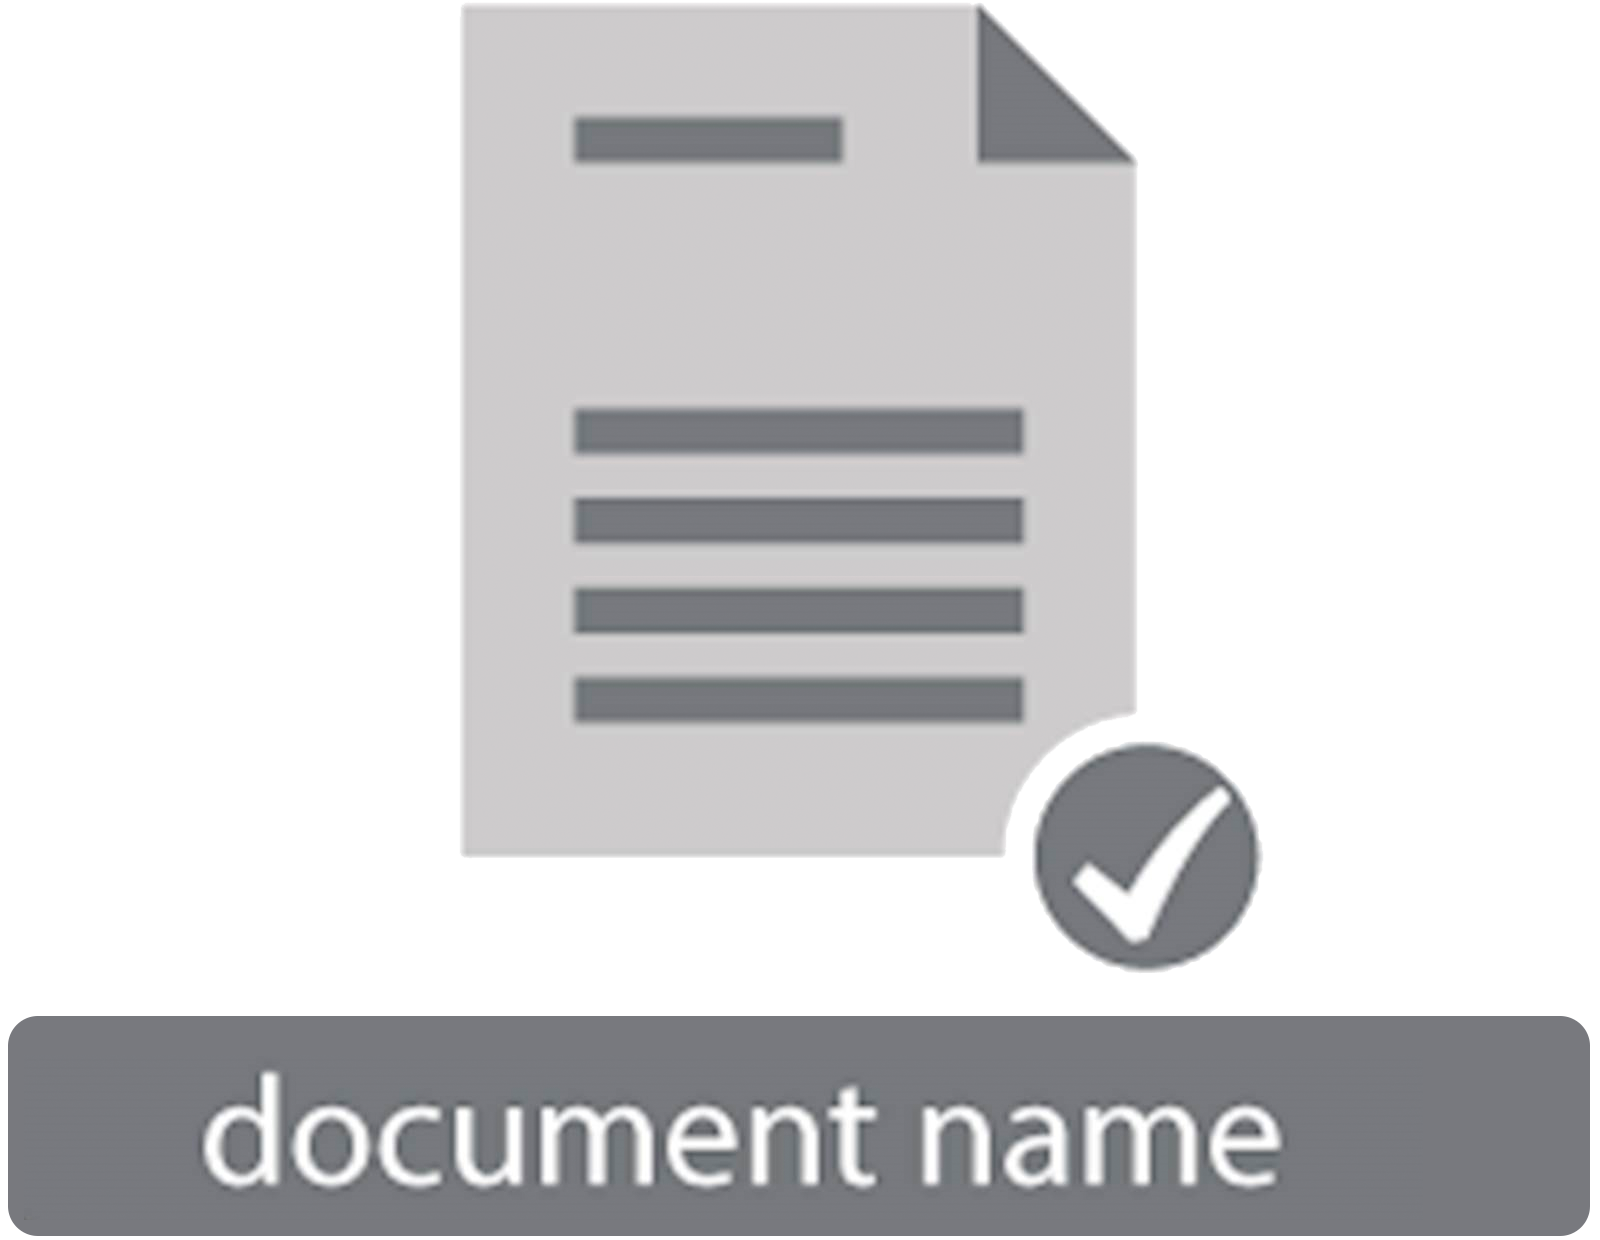 Drivve Image Name your document Graphic